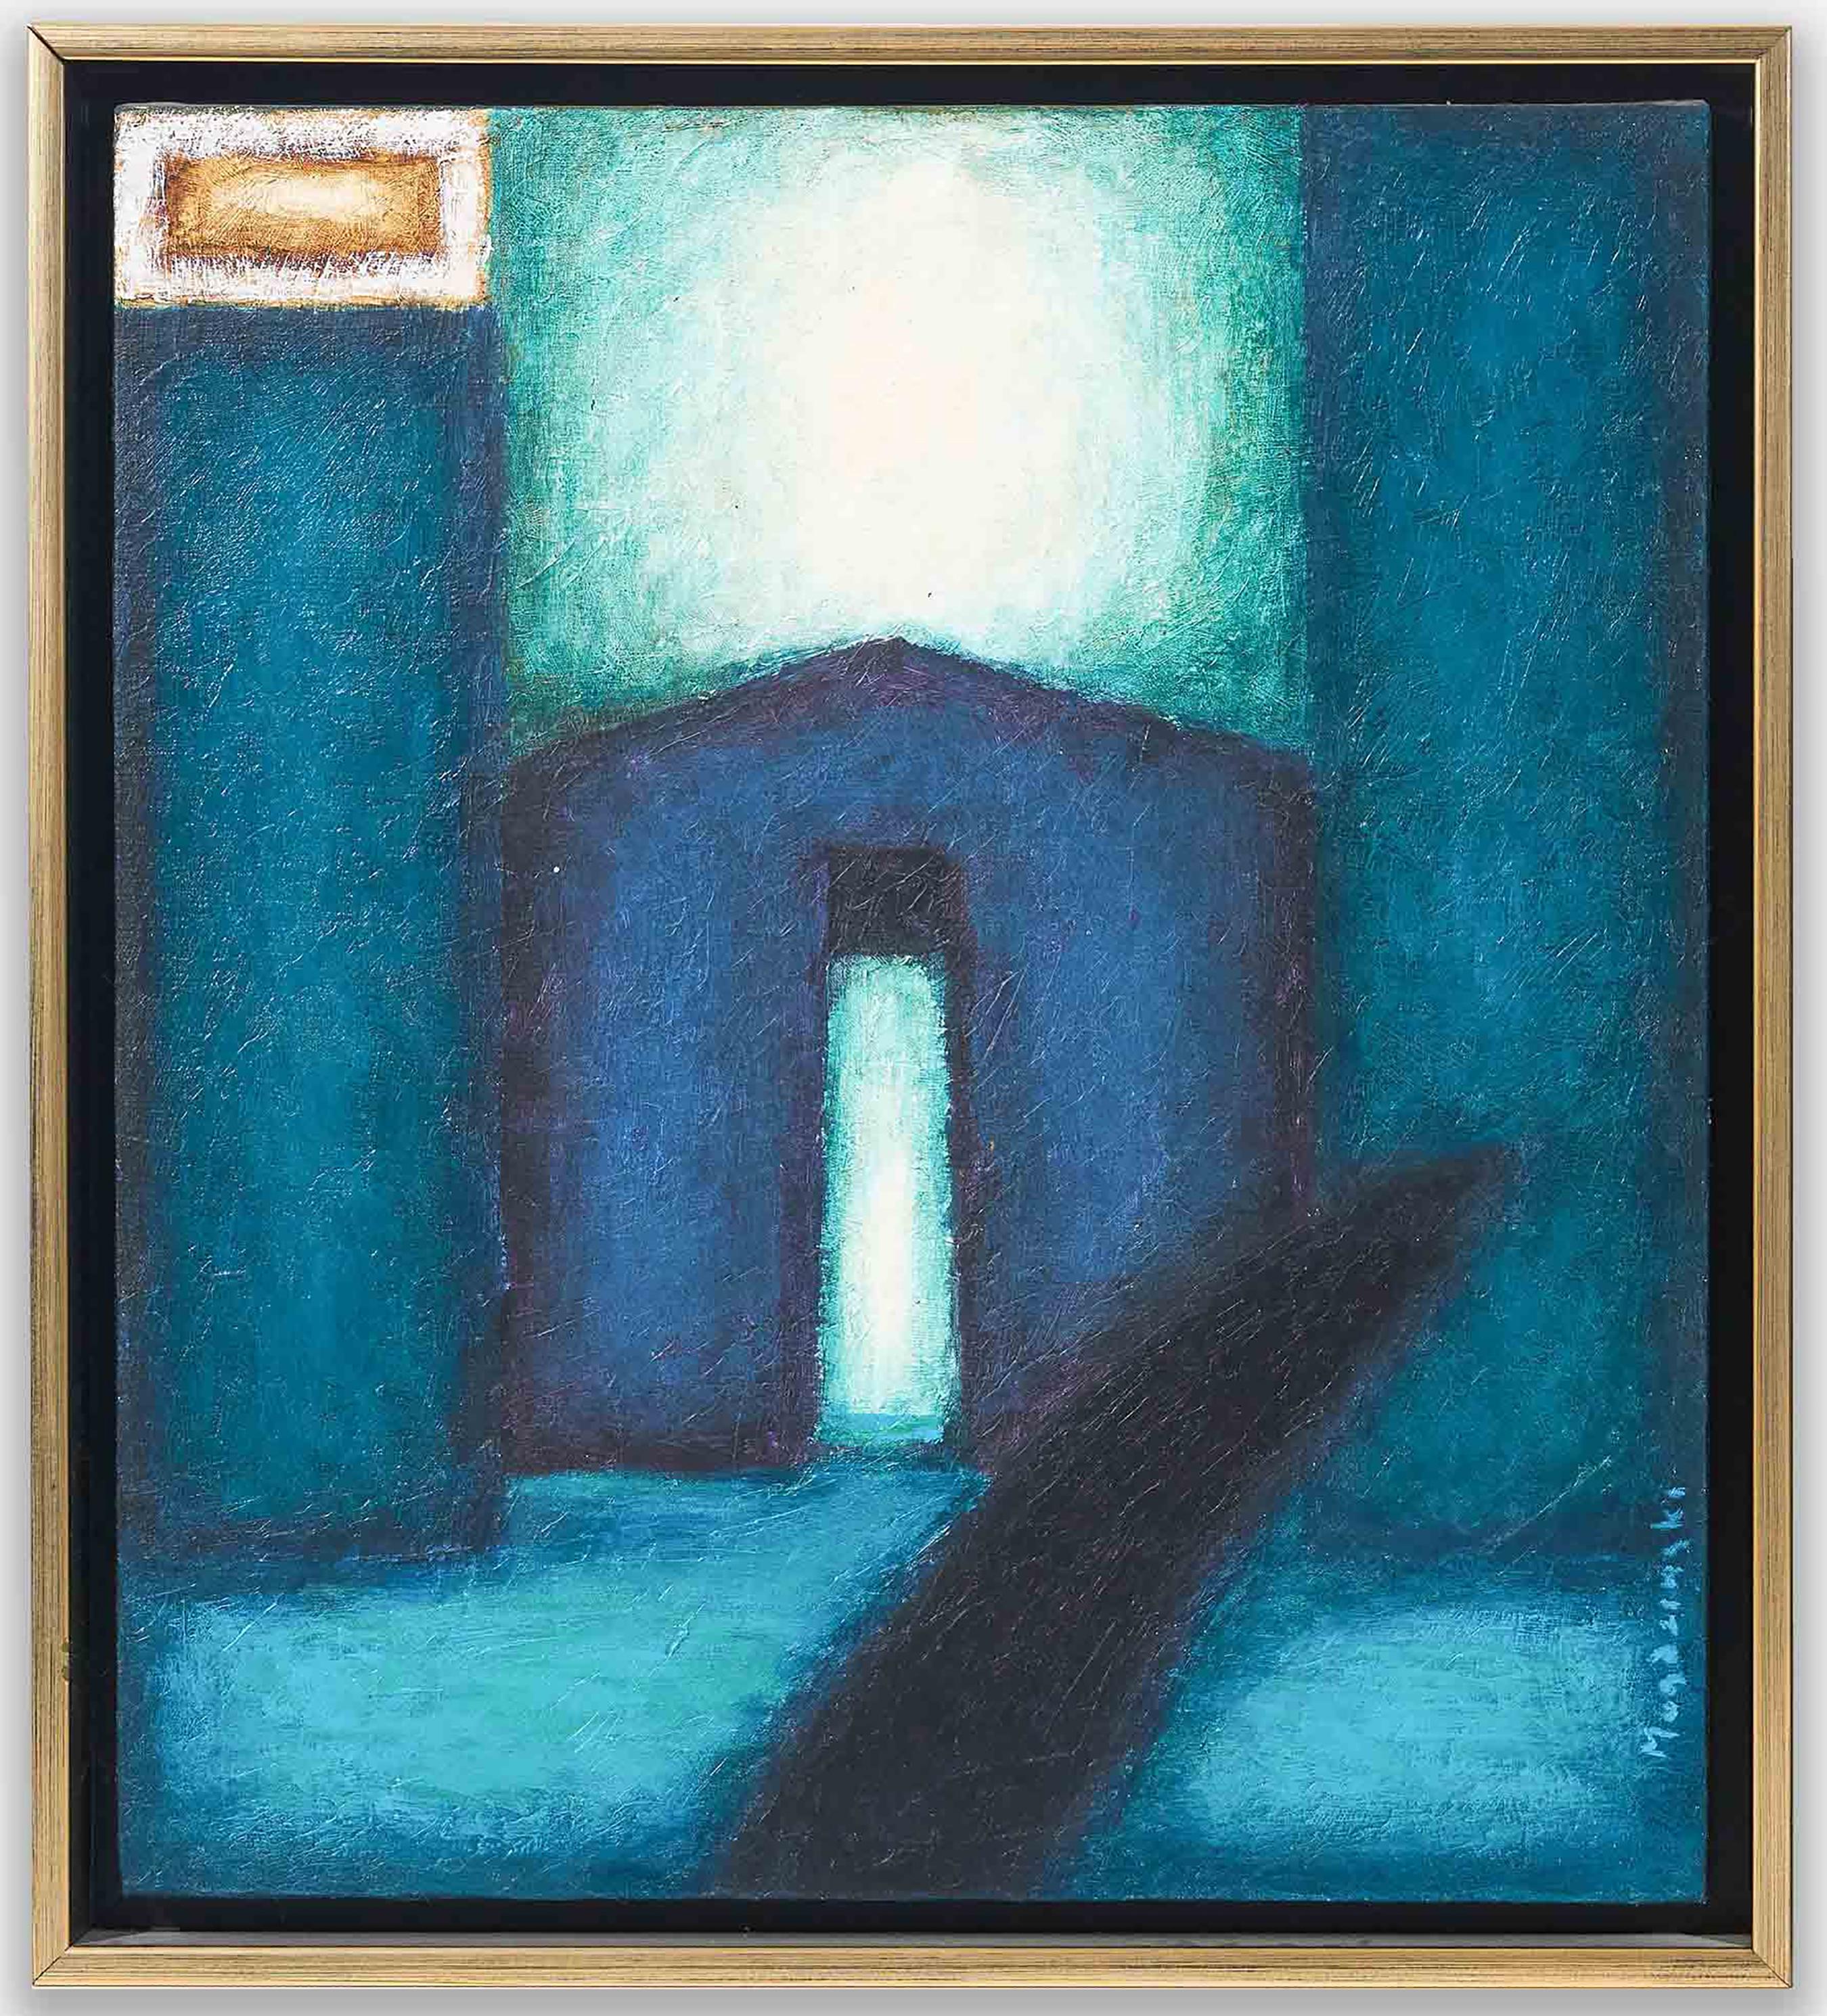 Unknown Abstract Painting -  Kris Magdzinski "Came So Far" 1995, original oil on canvas